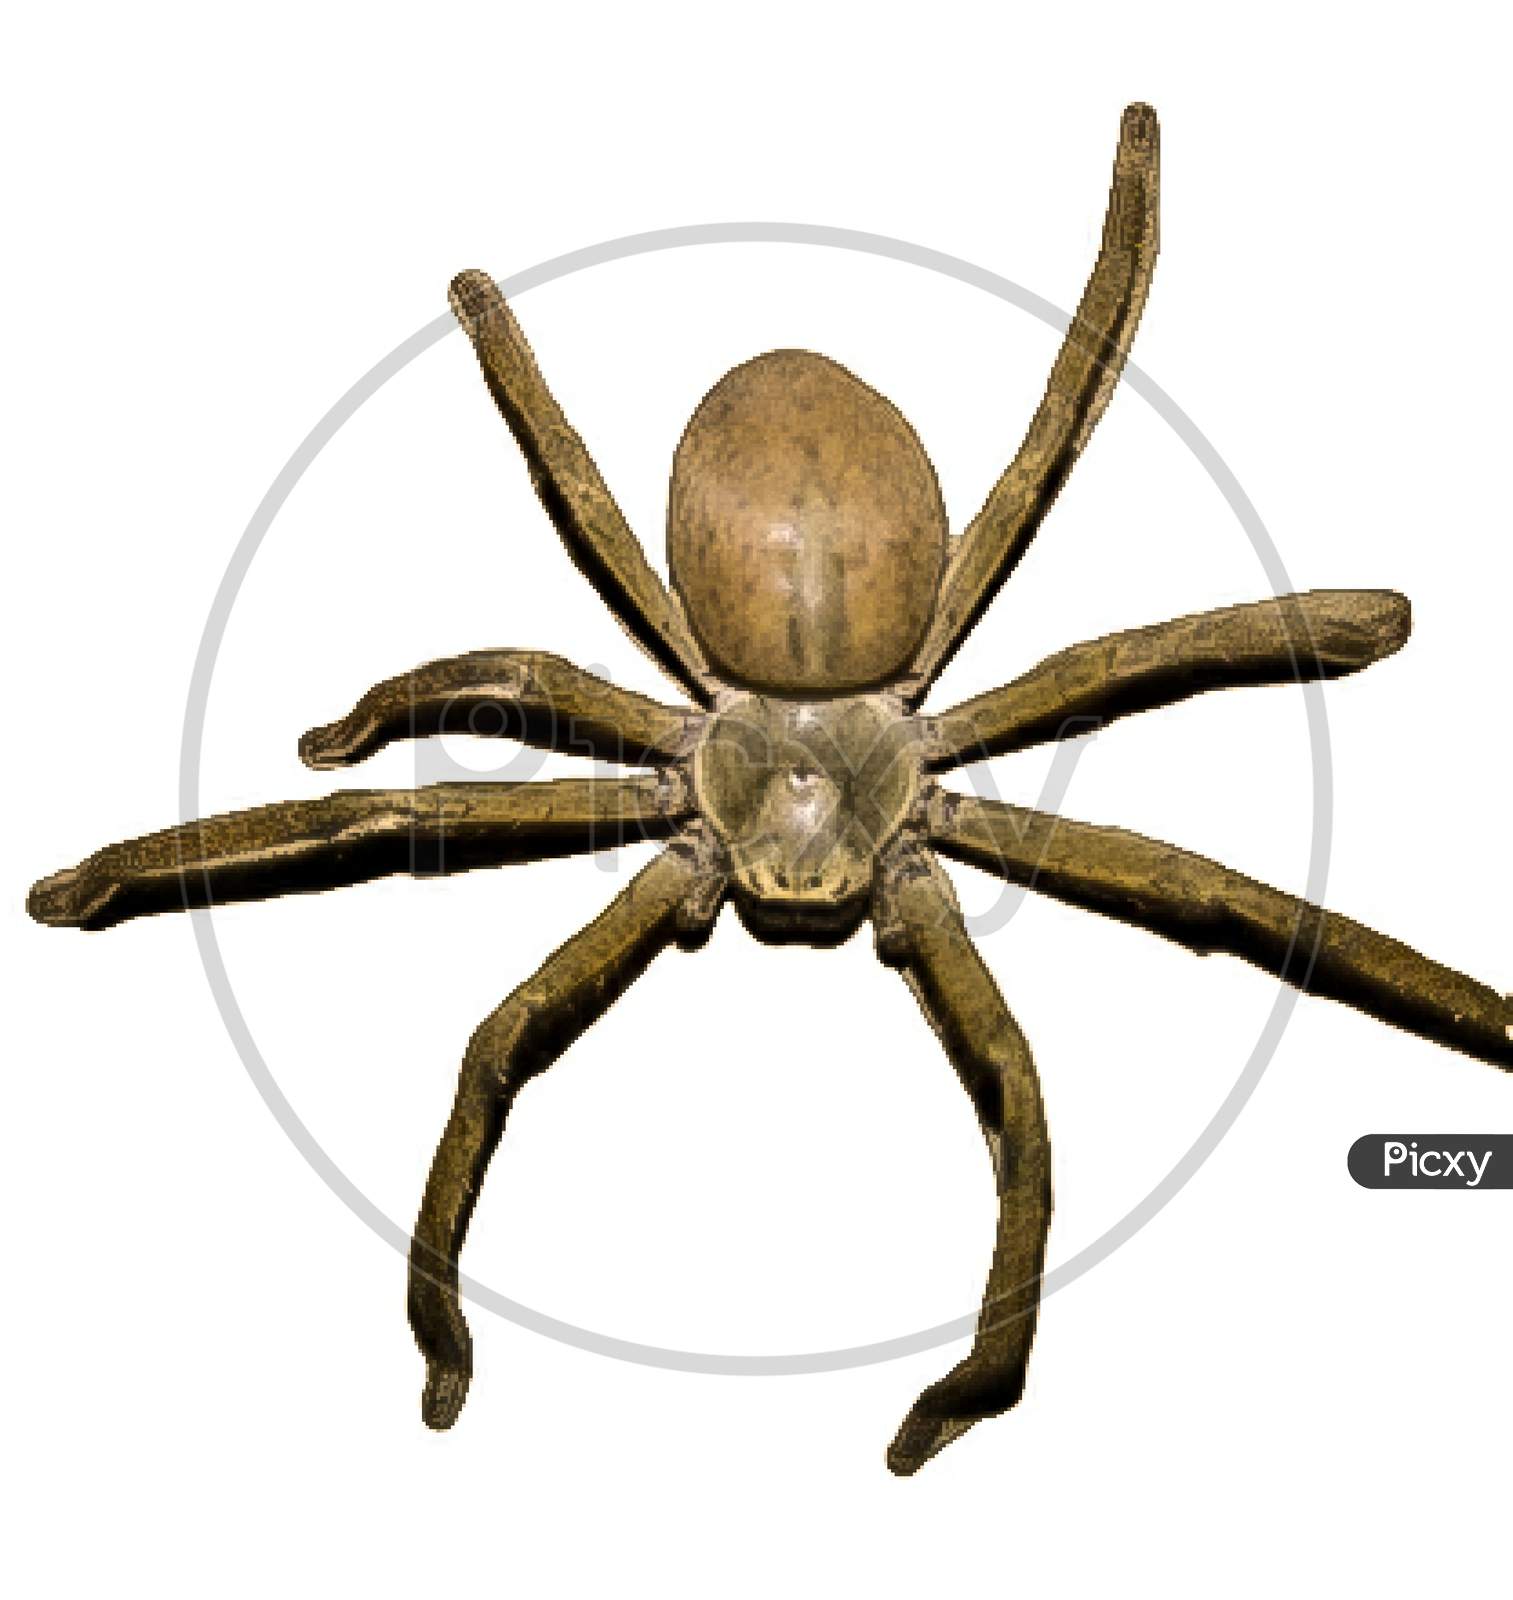 A picture of spider